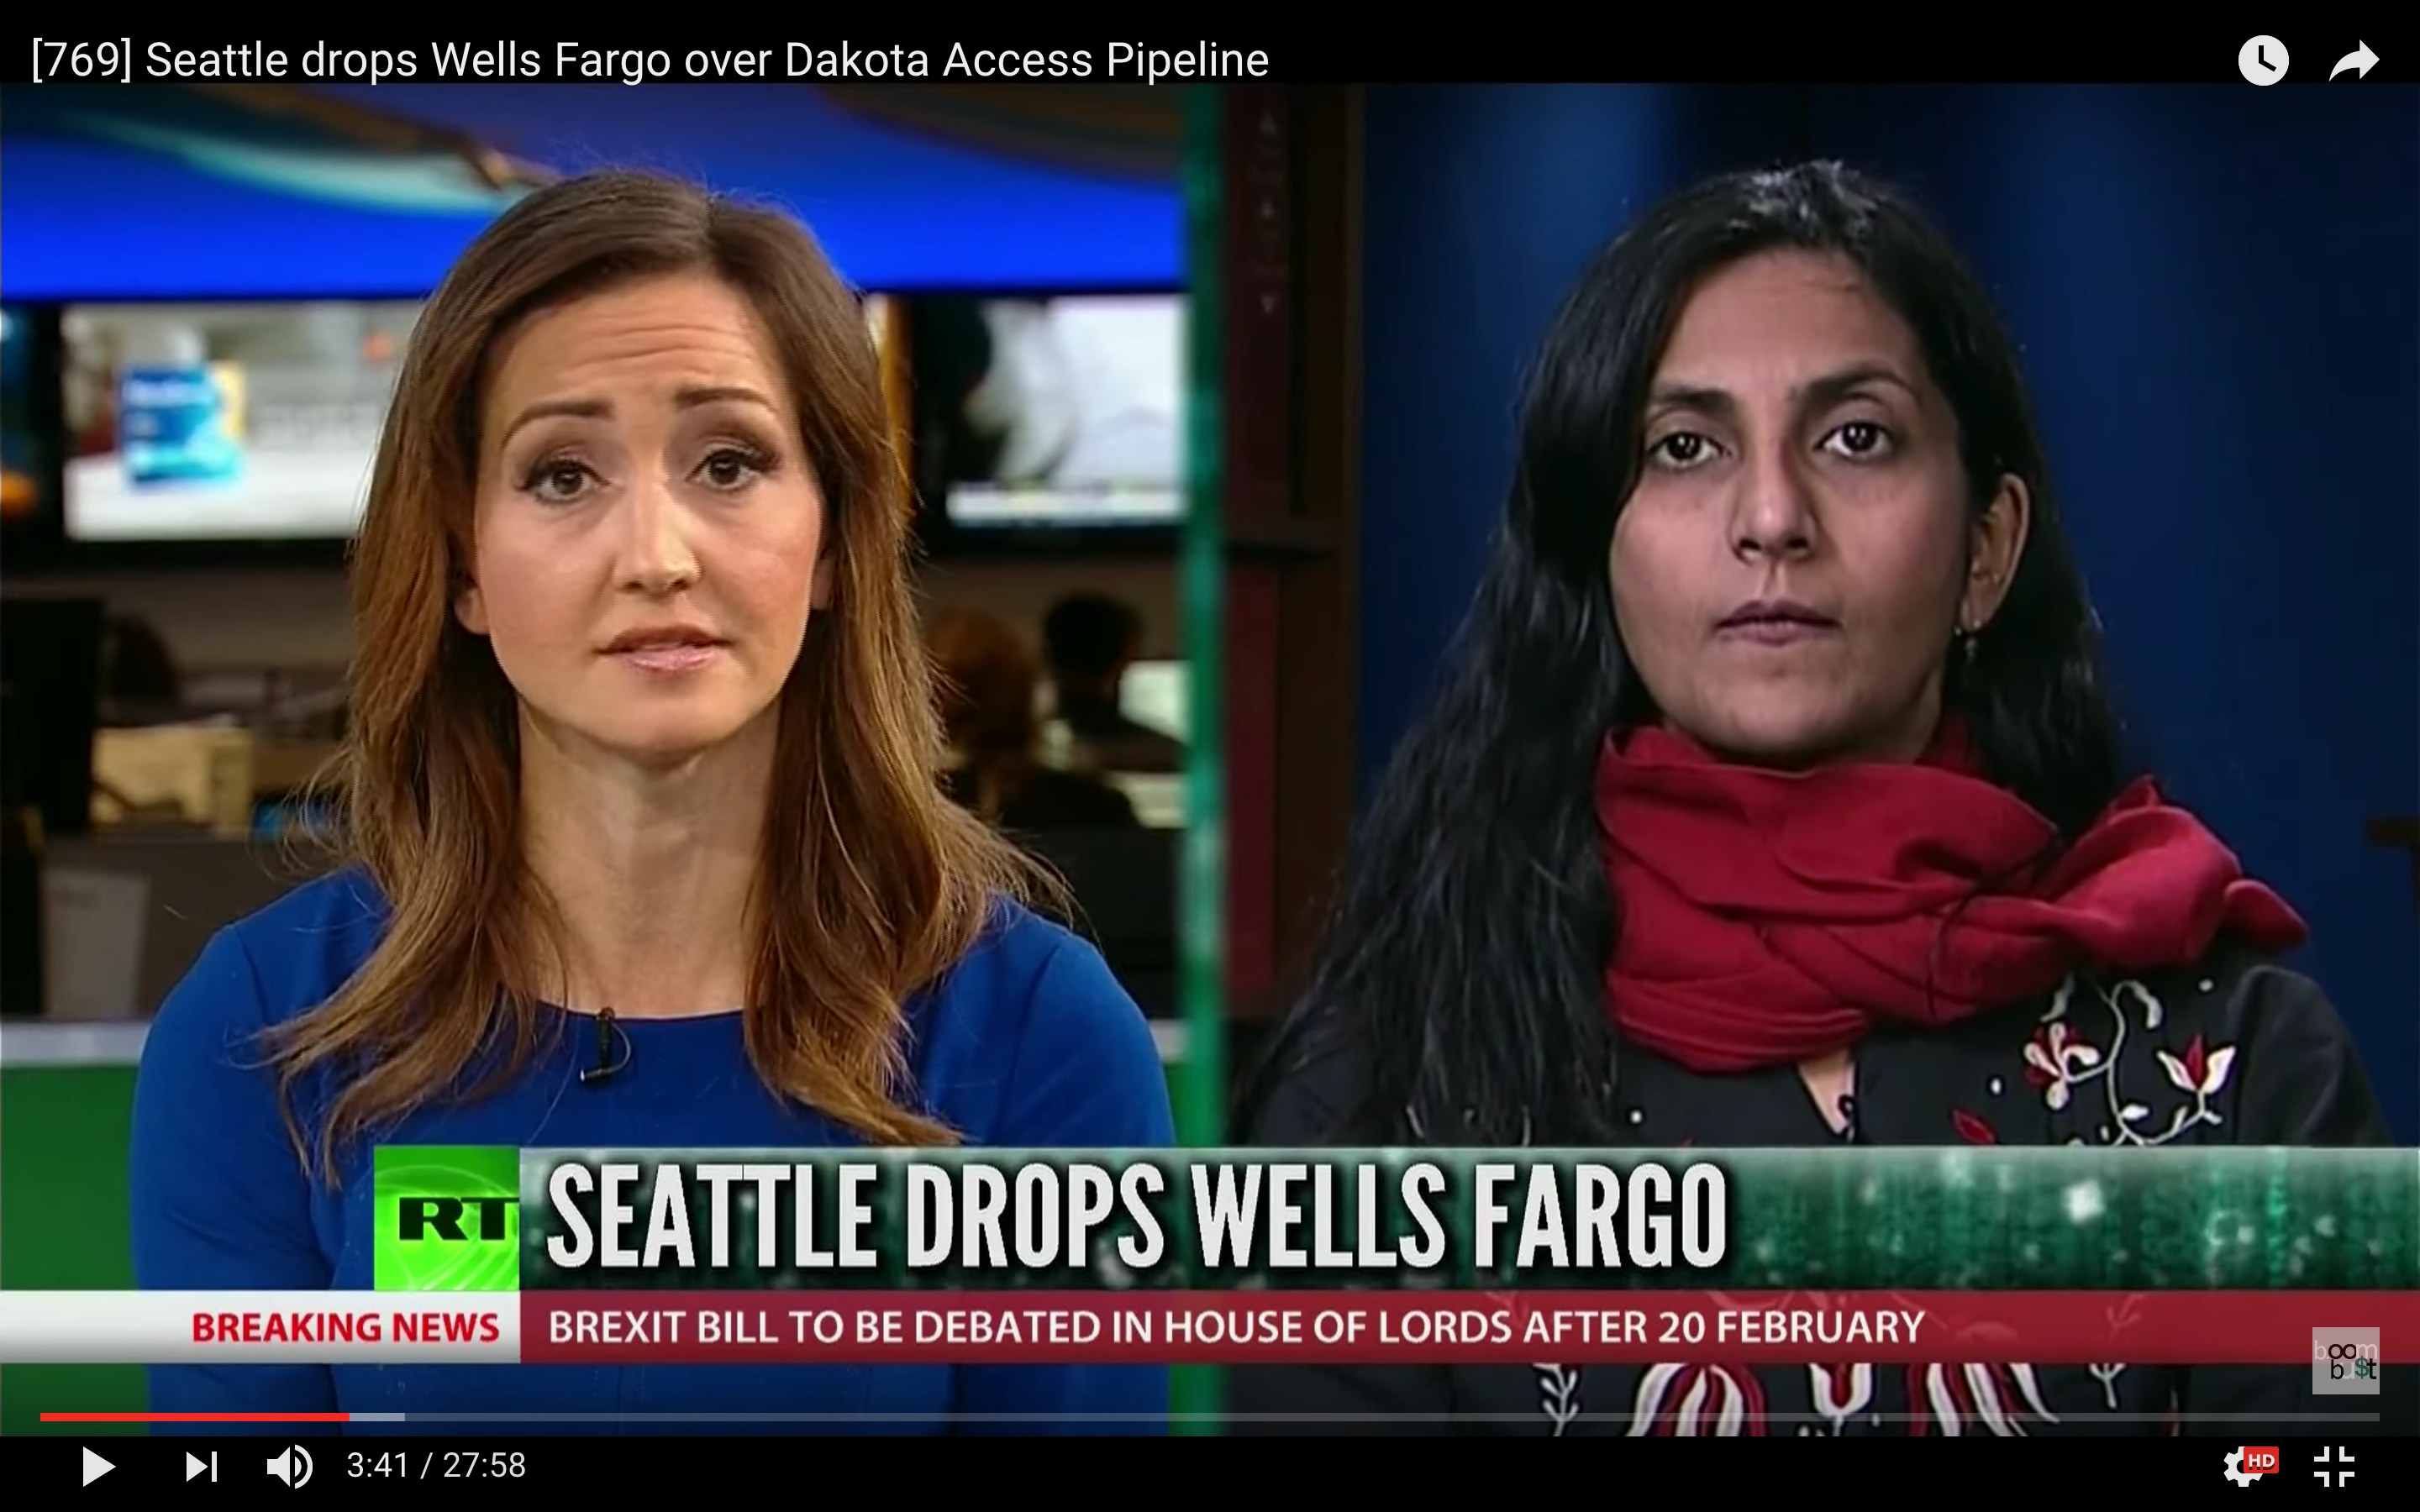 Breaking: Seattle Cuts Ties with Wells Fargo over Dakota Pipeline (not to mention their fake account scandal)